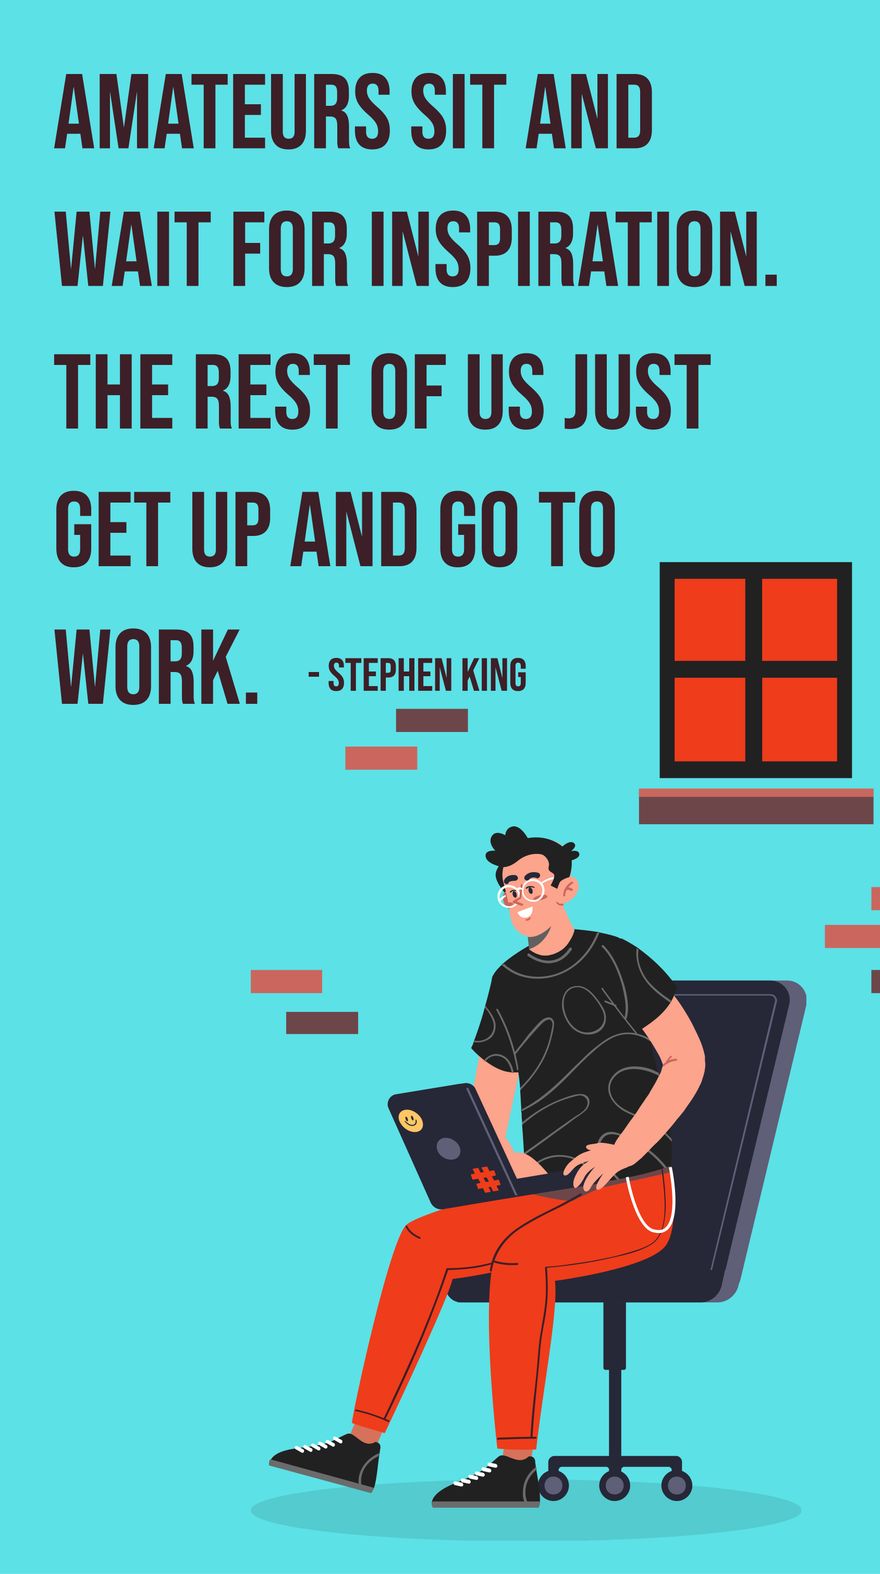 Free Stephen King - Amateurs sit and wait for inspiration. The rest of us just get up and go to work.